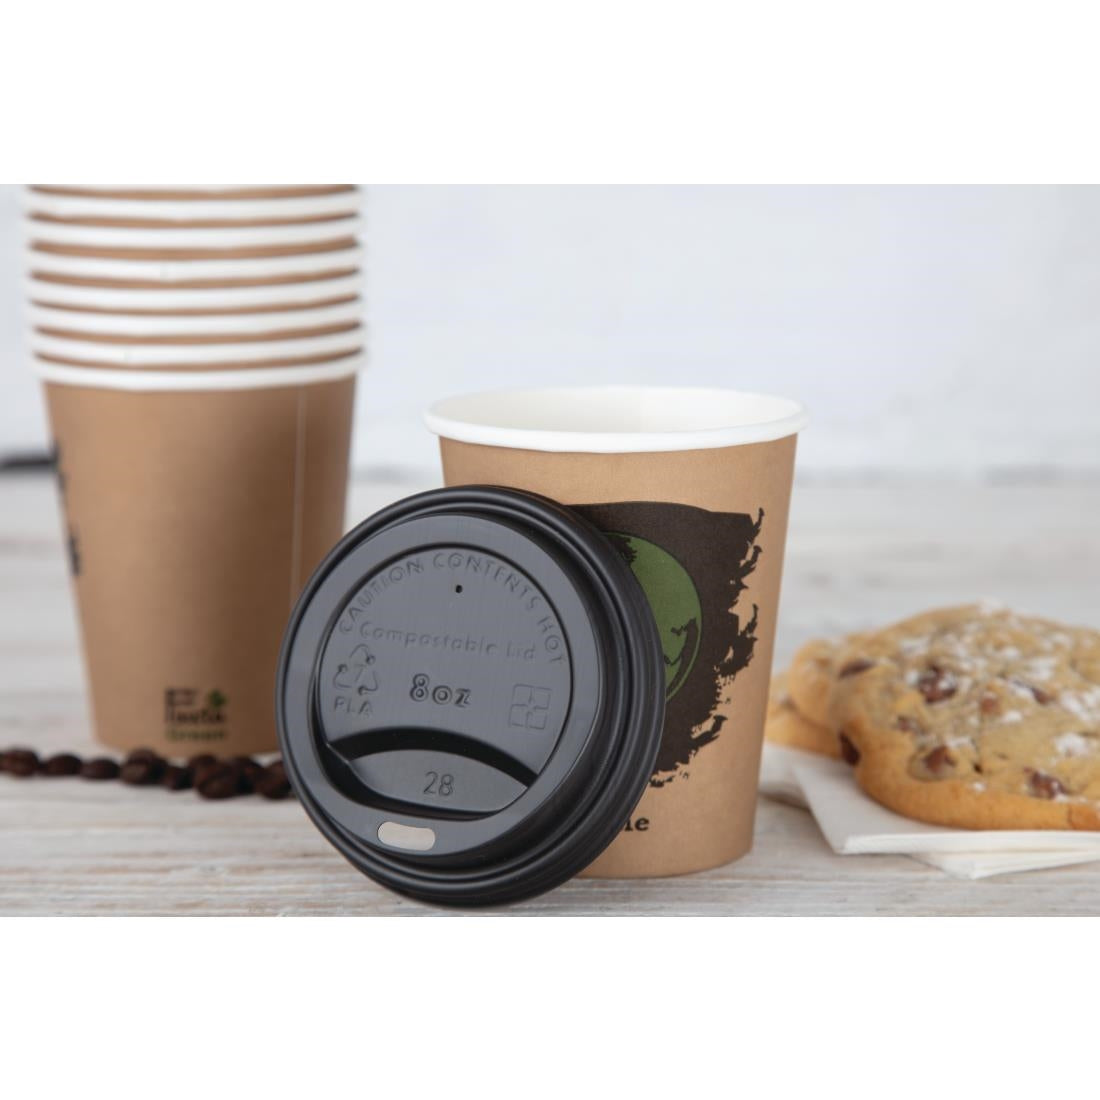 DS054 Fiesta Green Compostable Coffee Cup Lids 225ml / 8oz (Pack of 50) JD Catering Equipment Solutions Ltd